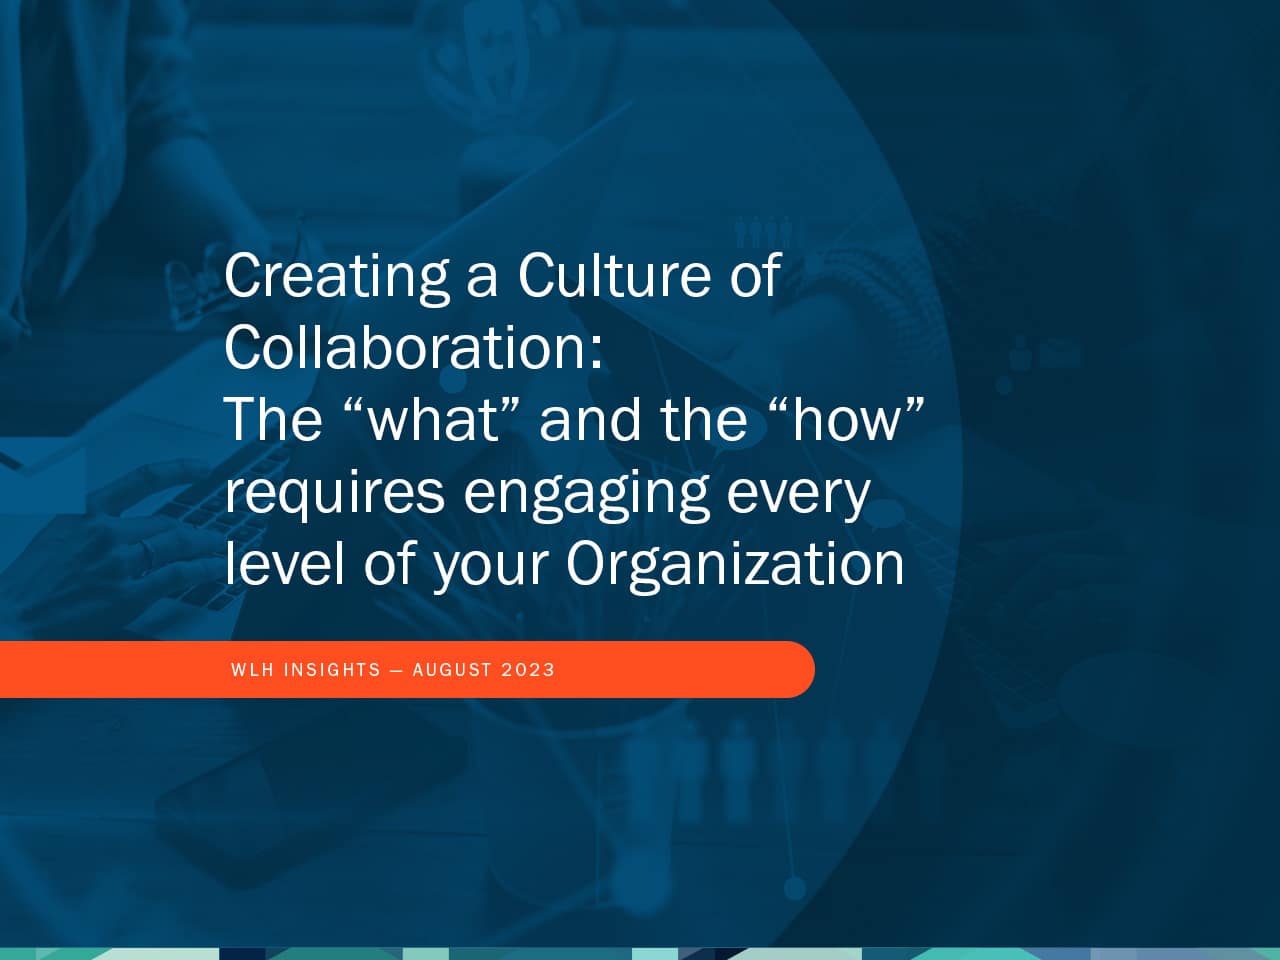 Creating a Culture of Collaboration:  The “what” and the “how” requires engaging every level of your Organization